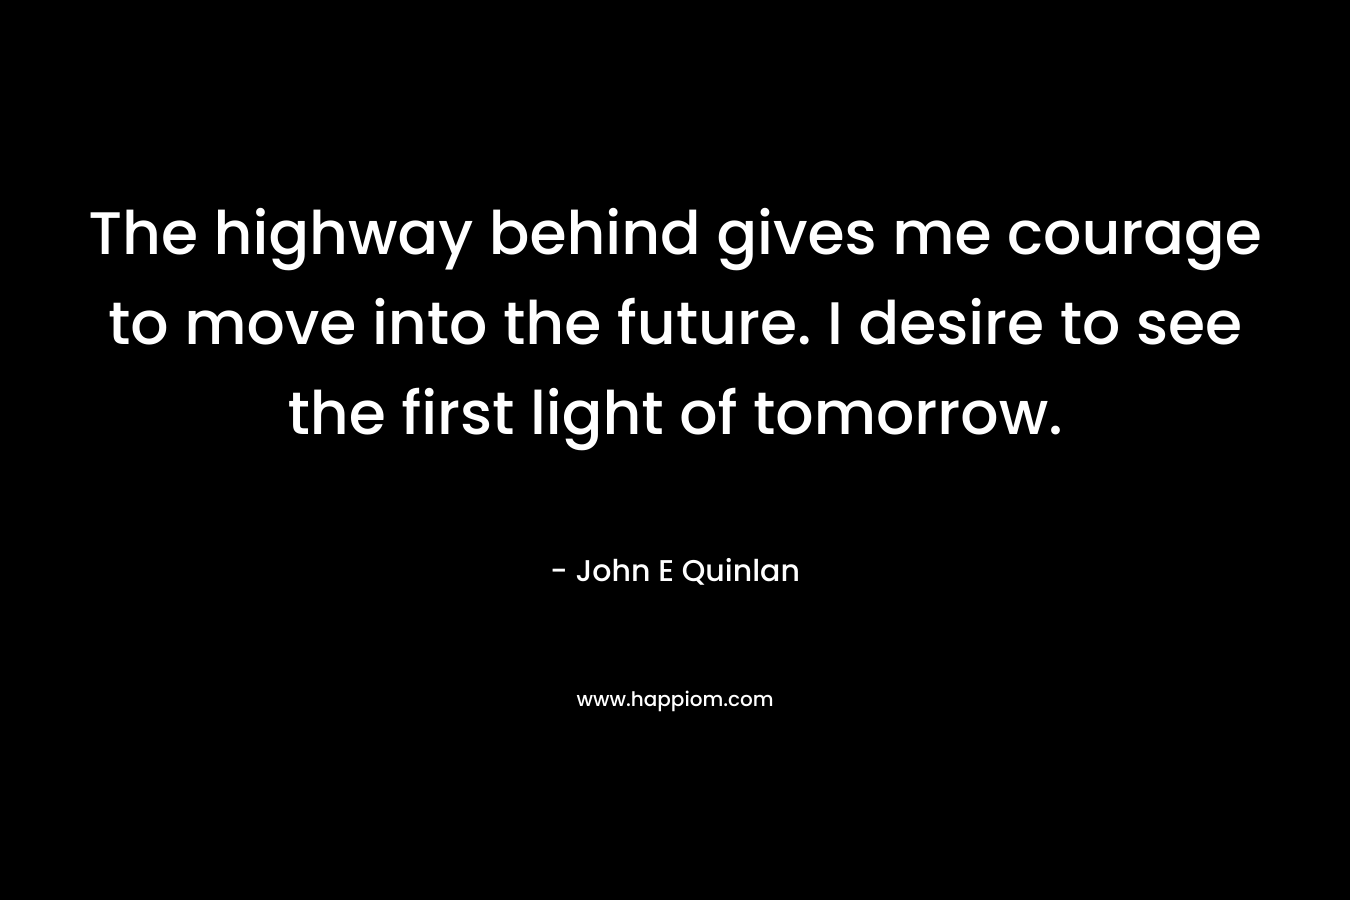 The highway behind gives me courage to move into the future. I desire to see the first light of tomorrow. – John E Quinlan